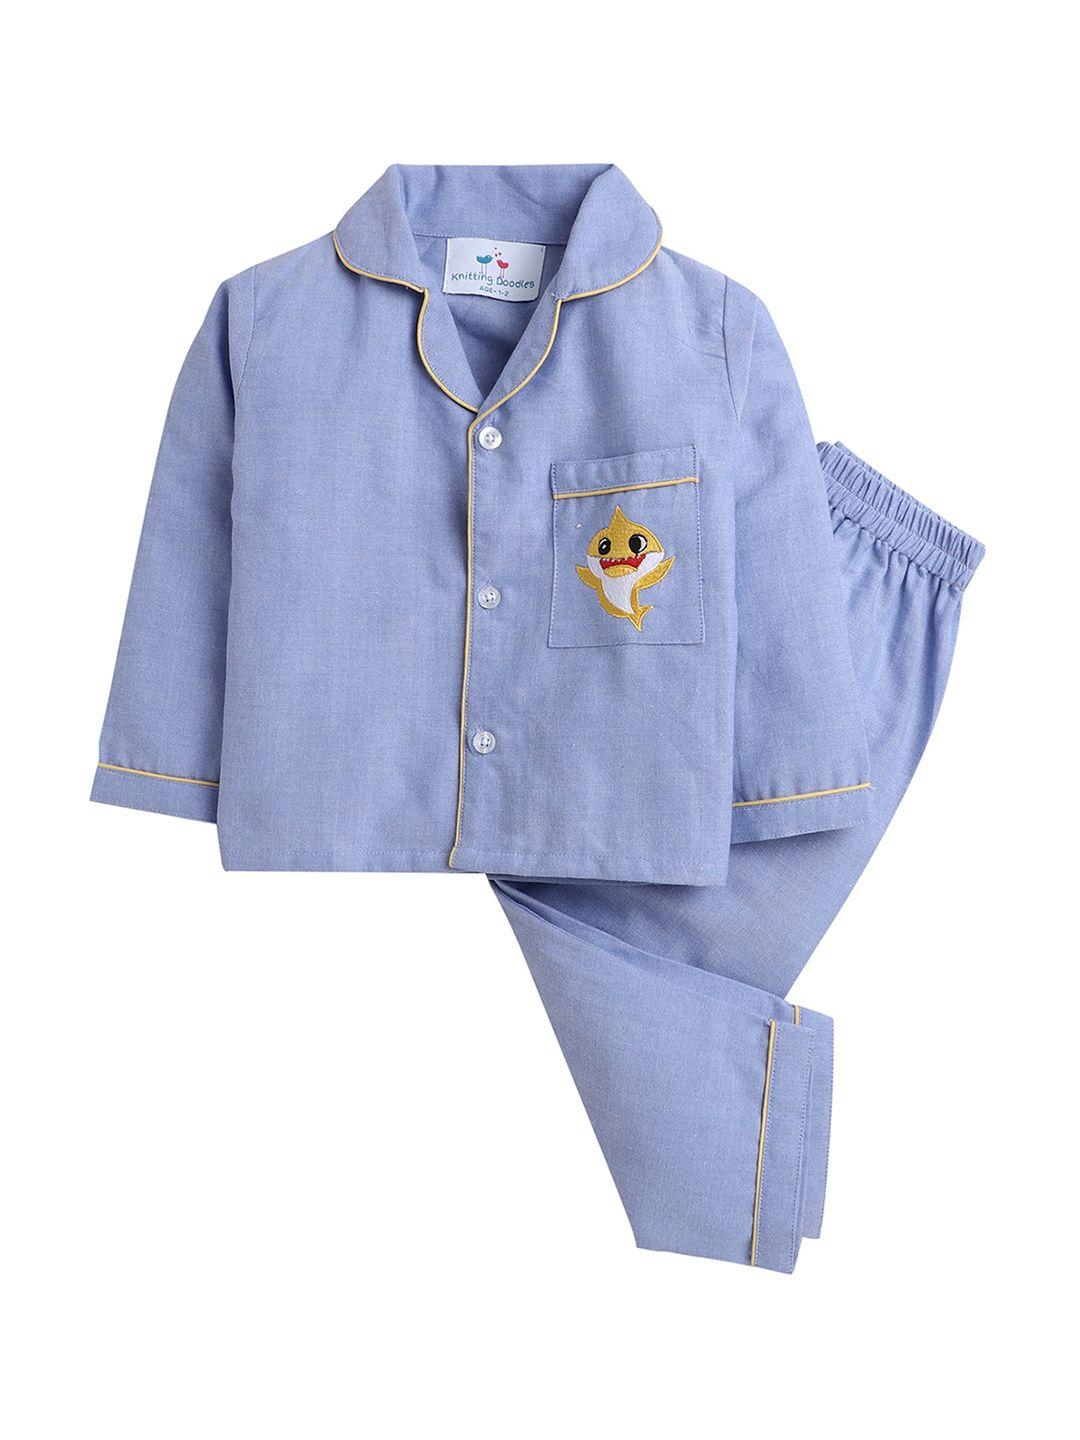 knitting doodles unisex kids blue & brown solid night suit